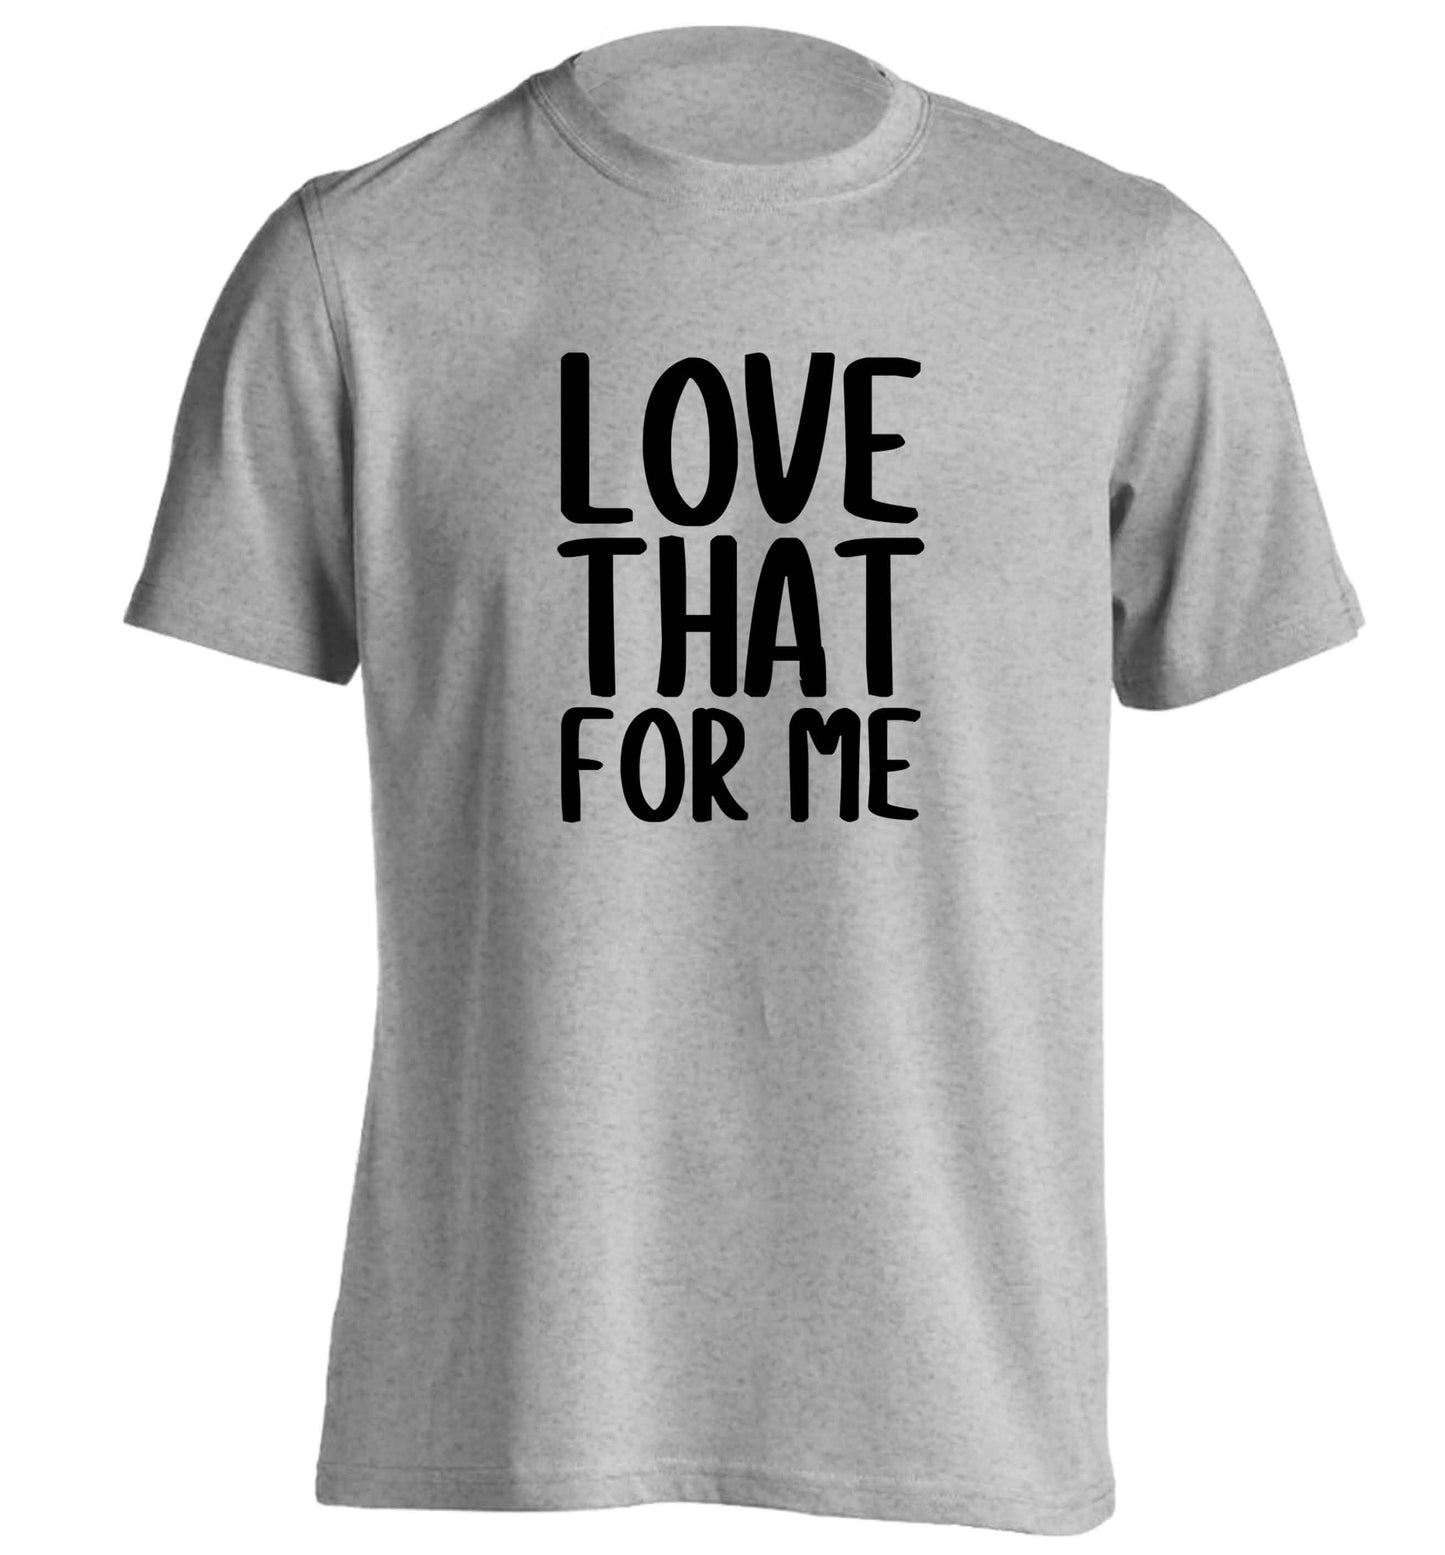 We love this for YOU! Who else loves saying this?!  adults unisex grey Tshirt 2XL